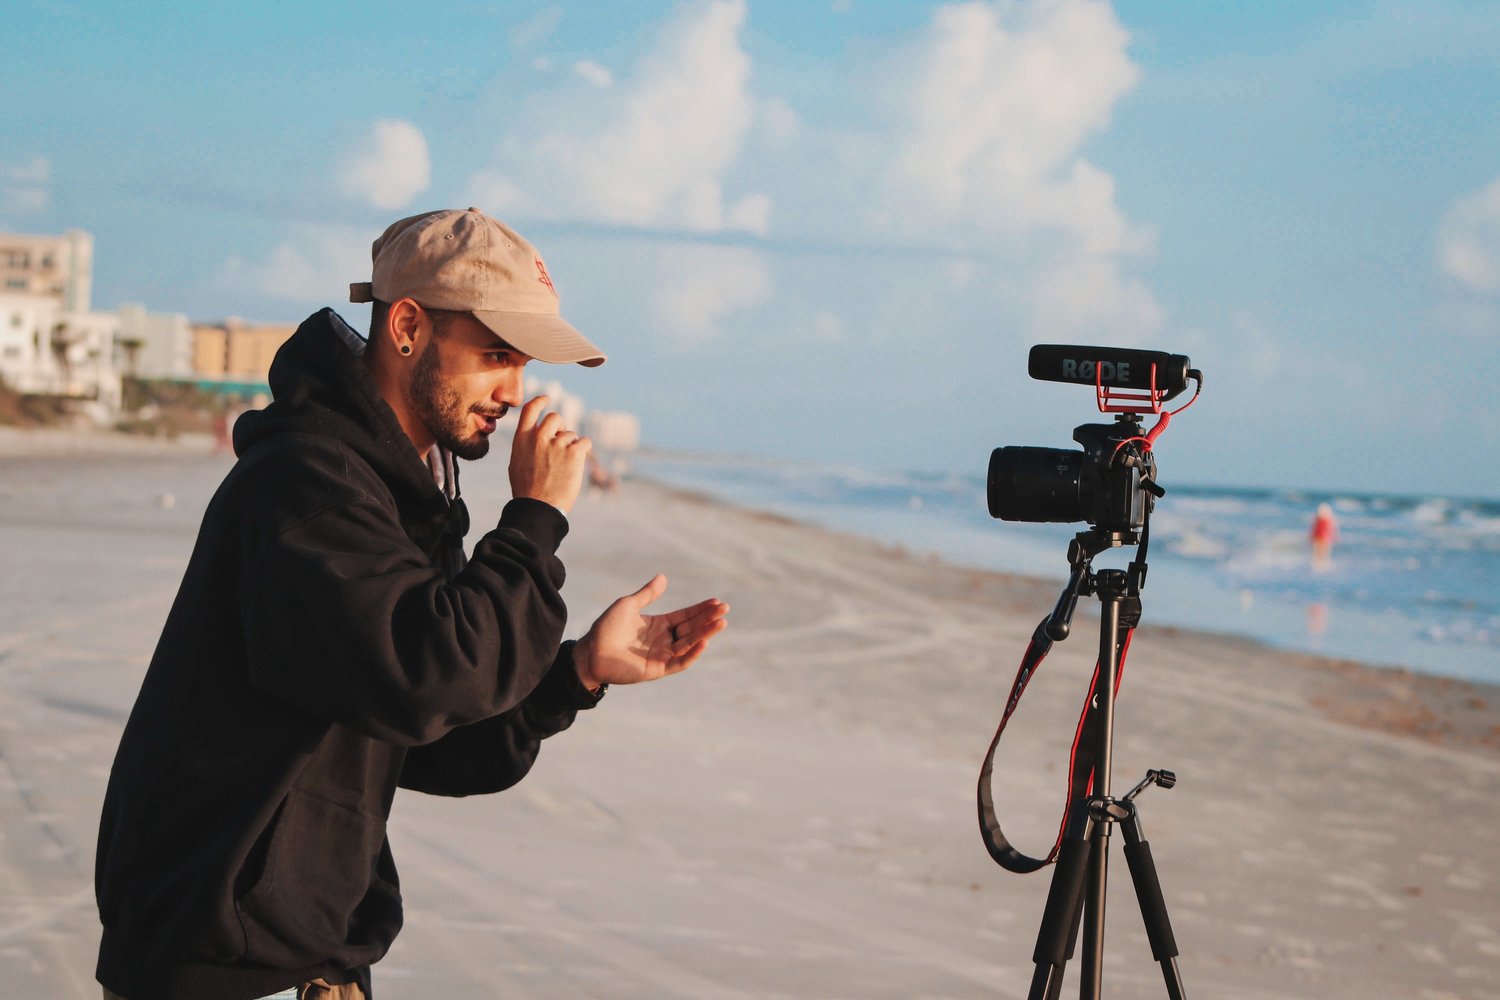 young man filming himself on a beach